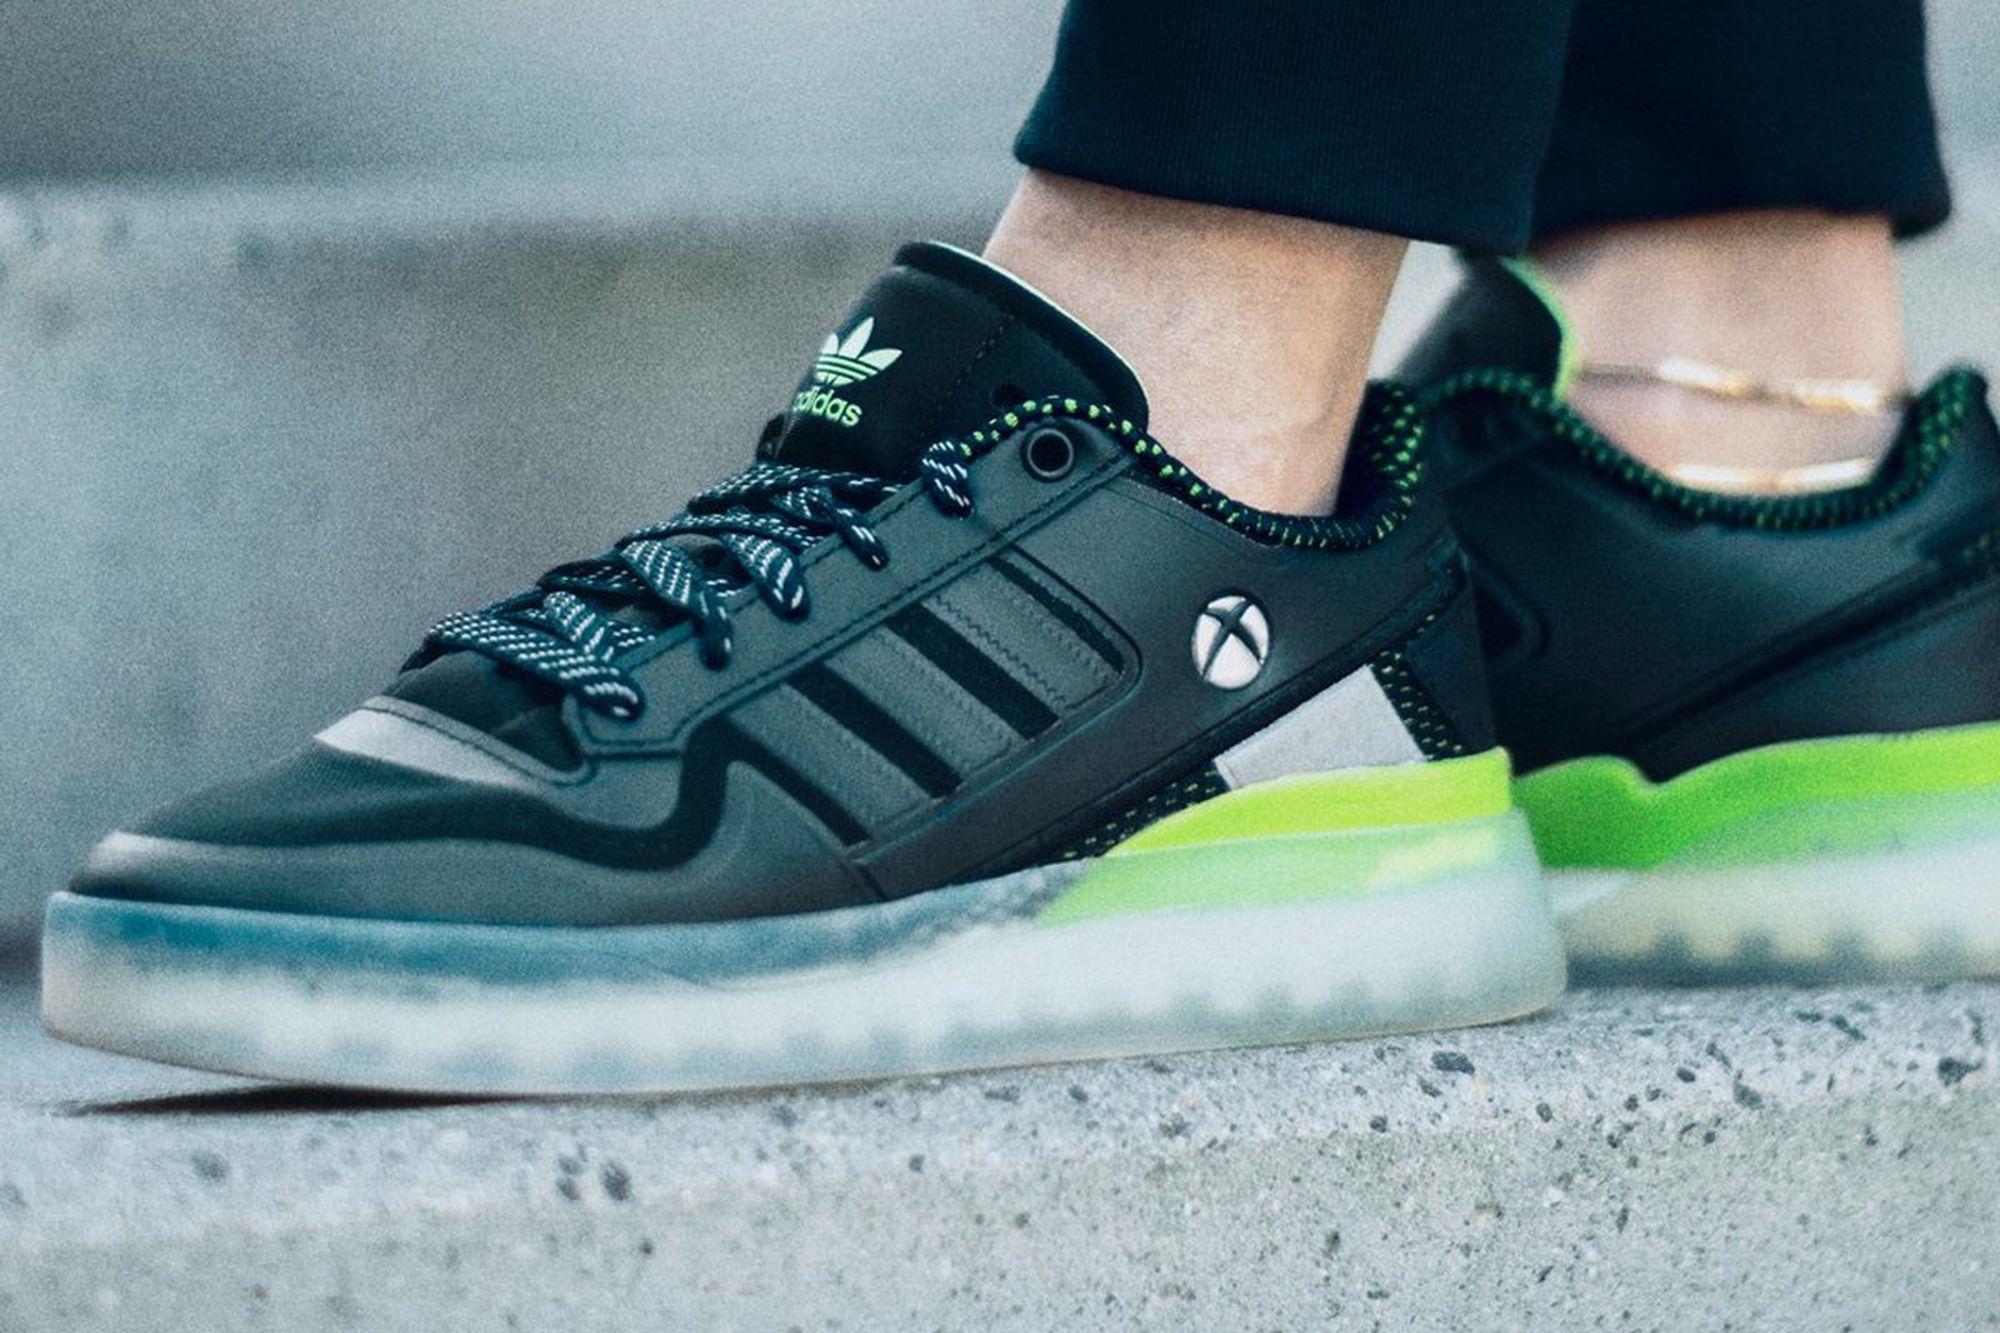 Adidas and Xbox teamed up on one more console-themed sneaker 